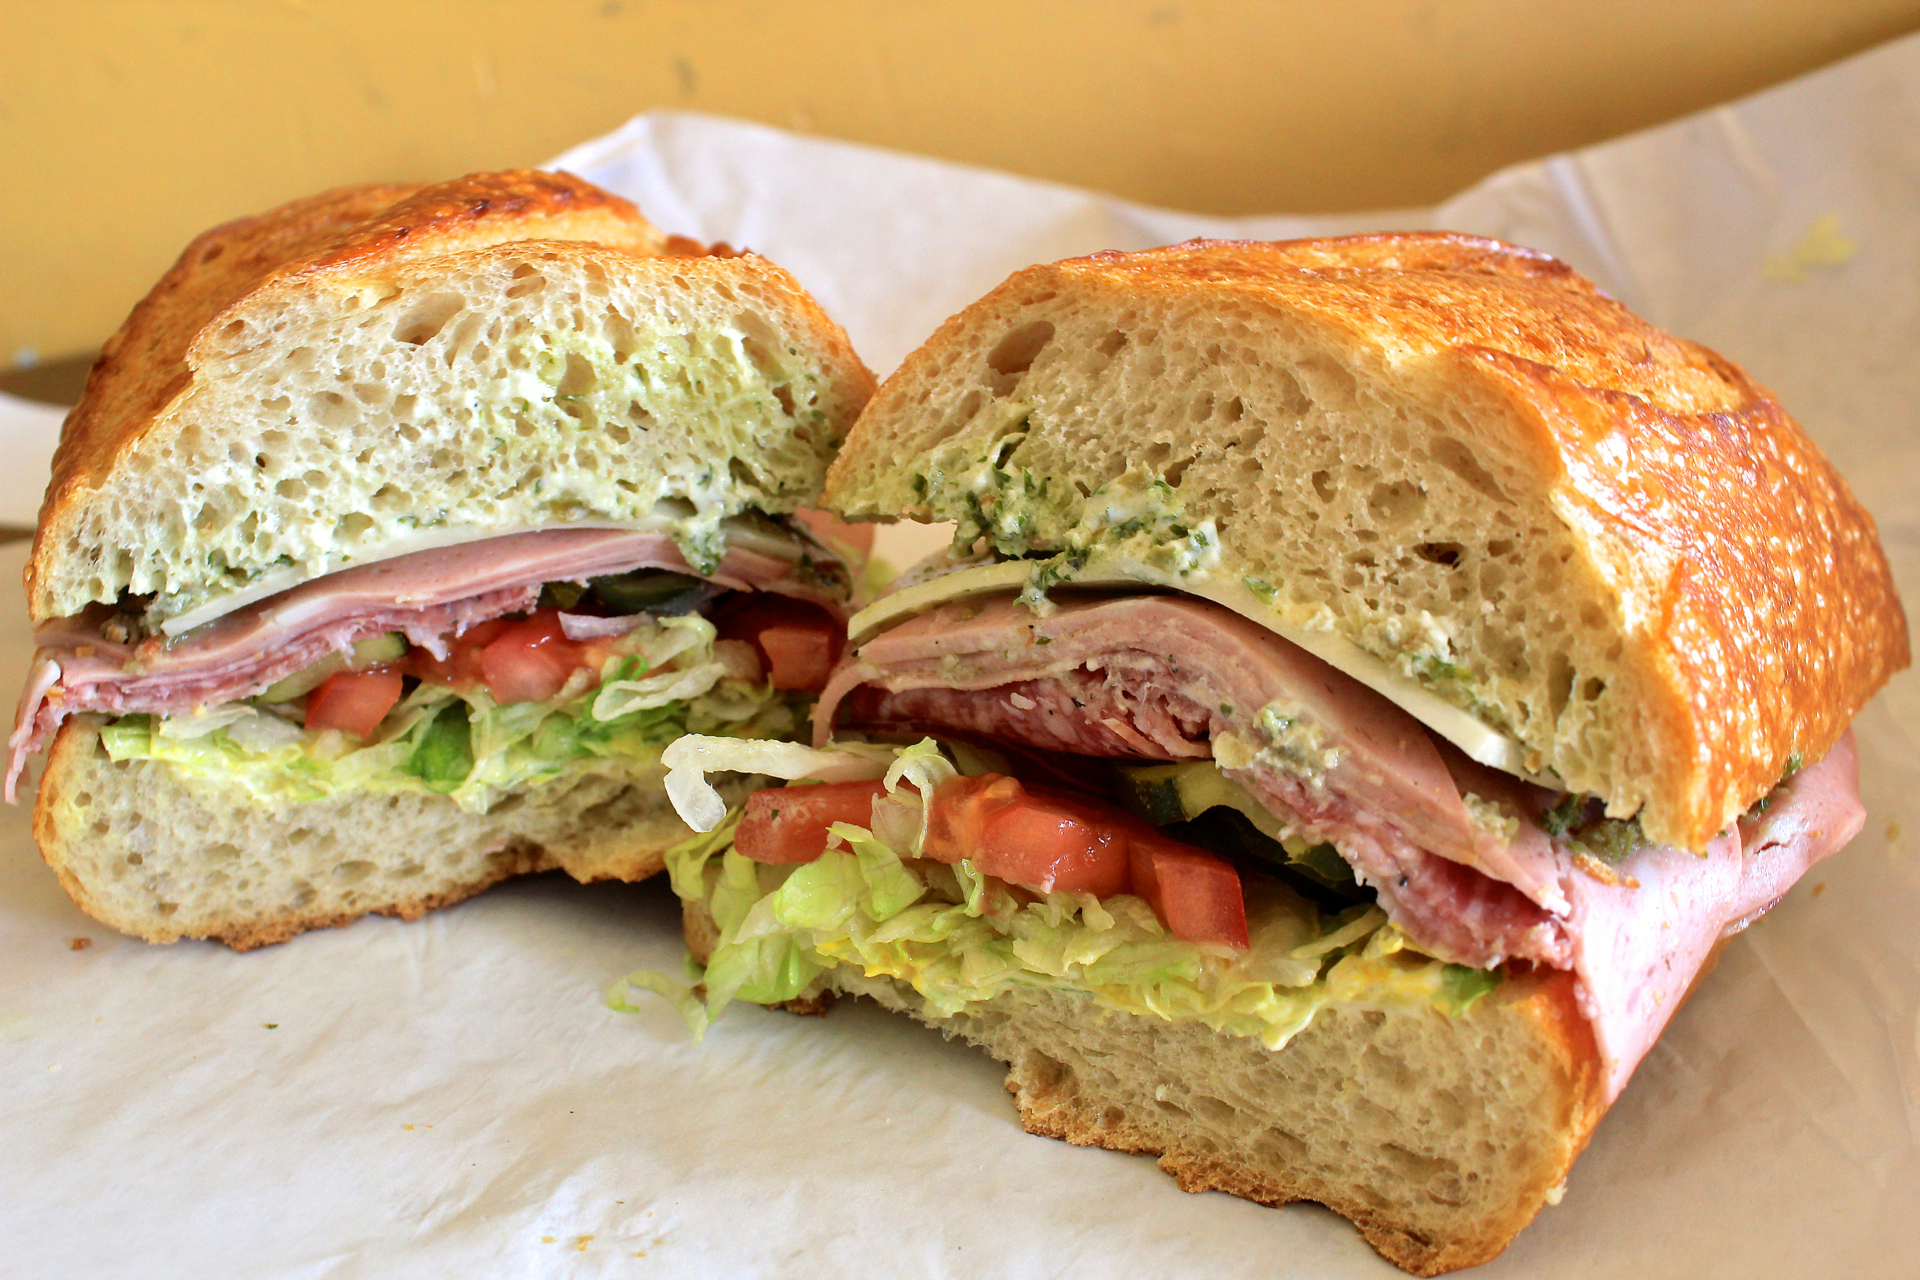 The Little Lucca combo sandwich with mortadella, provolone and salami.